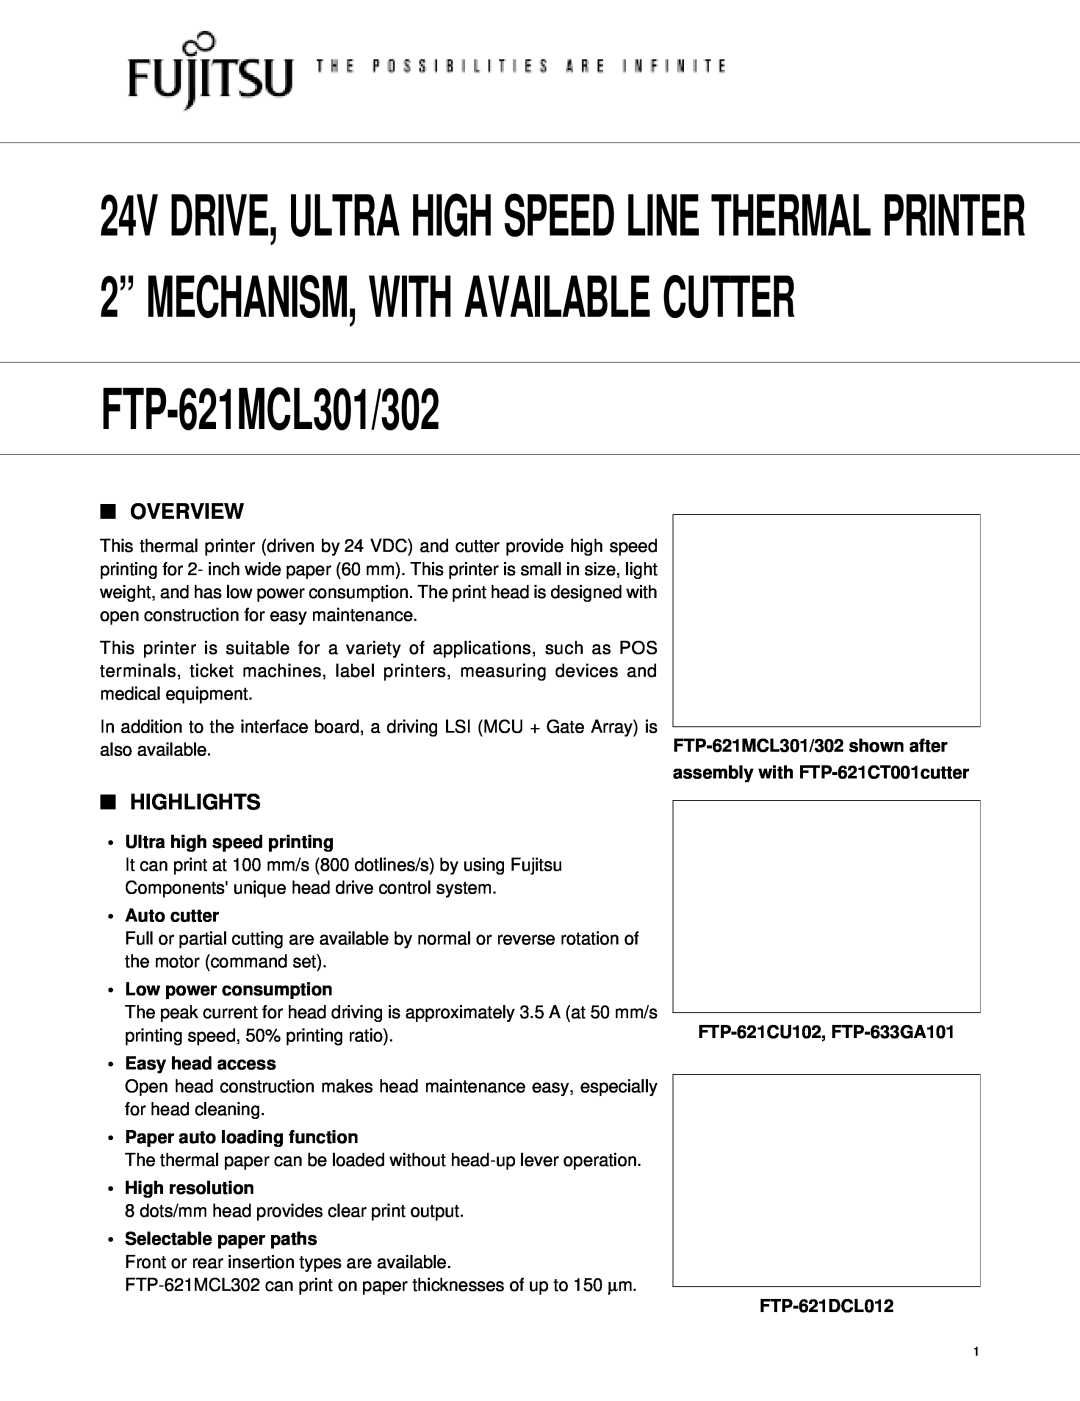 Fujitsu manual Overview, Highlights, FTP-621MCL301/302 shown after assembly with FTP-621CT001cutter, Auto cutter 